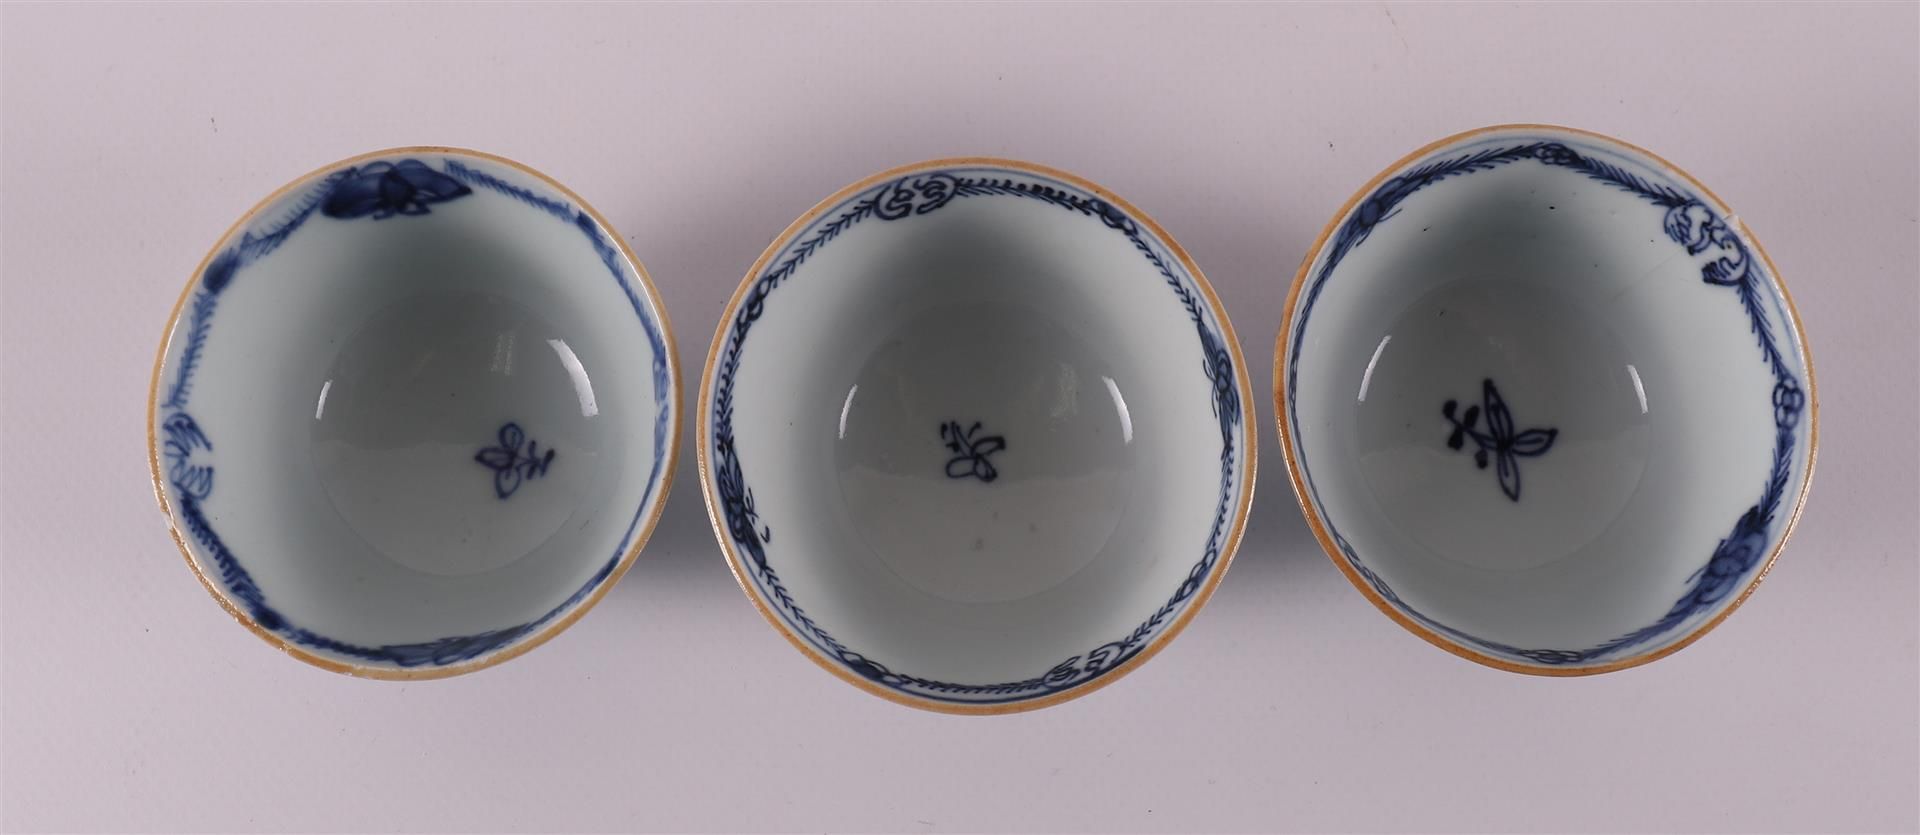 Six blue/white porcelain cups and saucers, China, Qianlong, 18th century. - Image 13 of 20